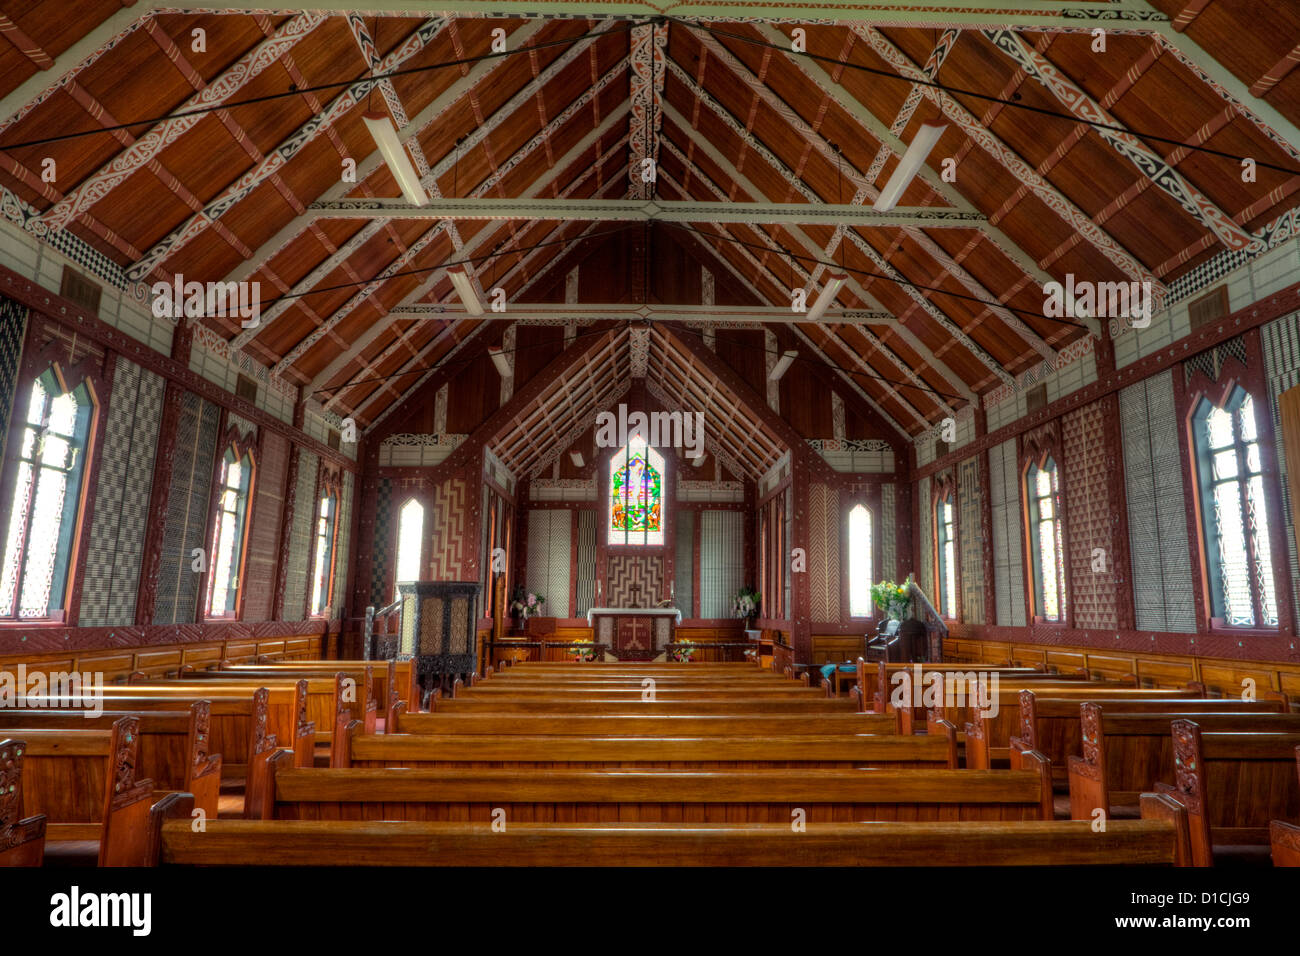 Cultural Syncretism. Decorated Ceiling and Rafter Supports with Maori Motifs, St. Mary's Anglican Church, Tikitiki, New Zealand. Stock Photo